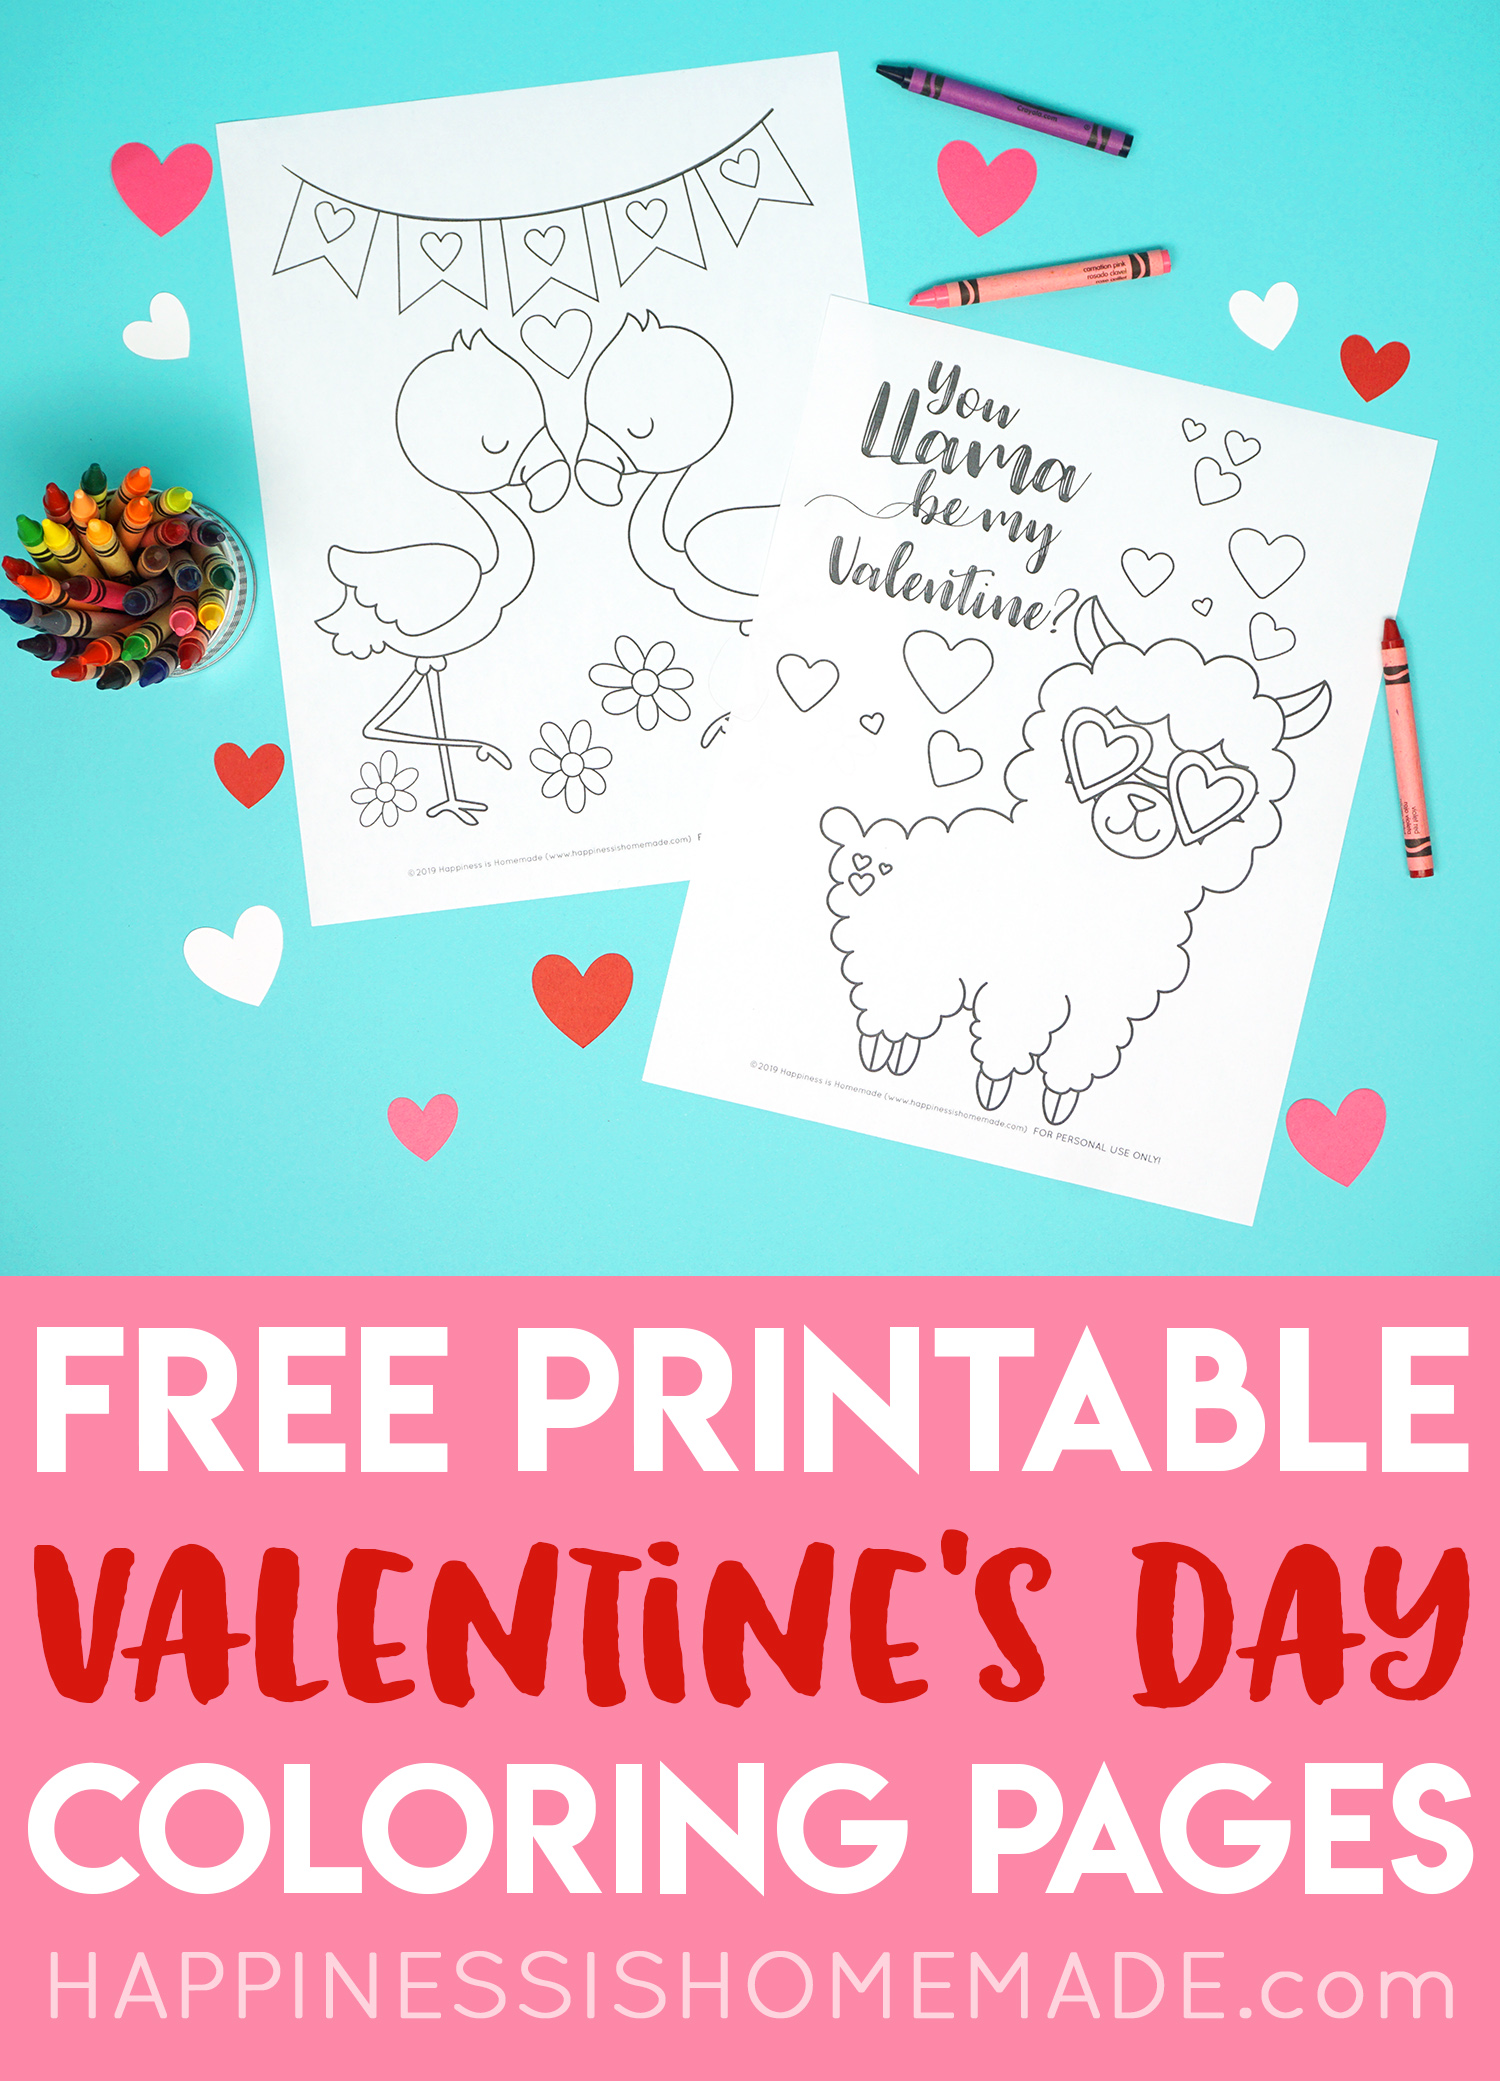 87 Free Printable Valentine Coloring Pages For Adults Images & Pictures In HD